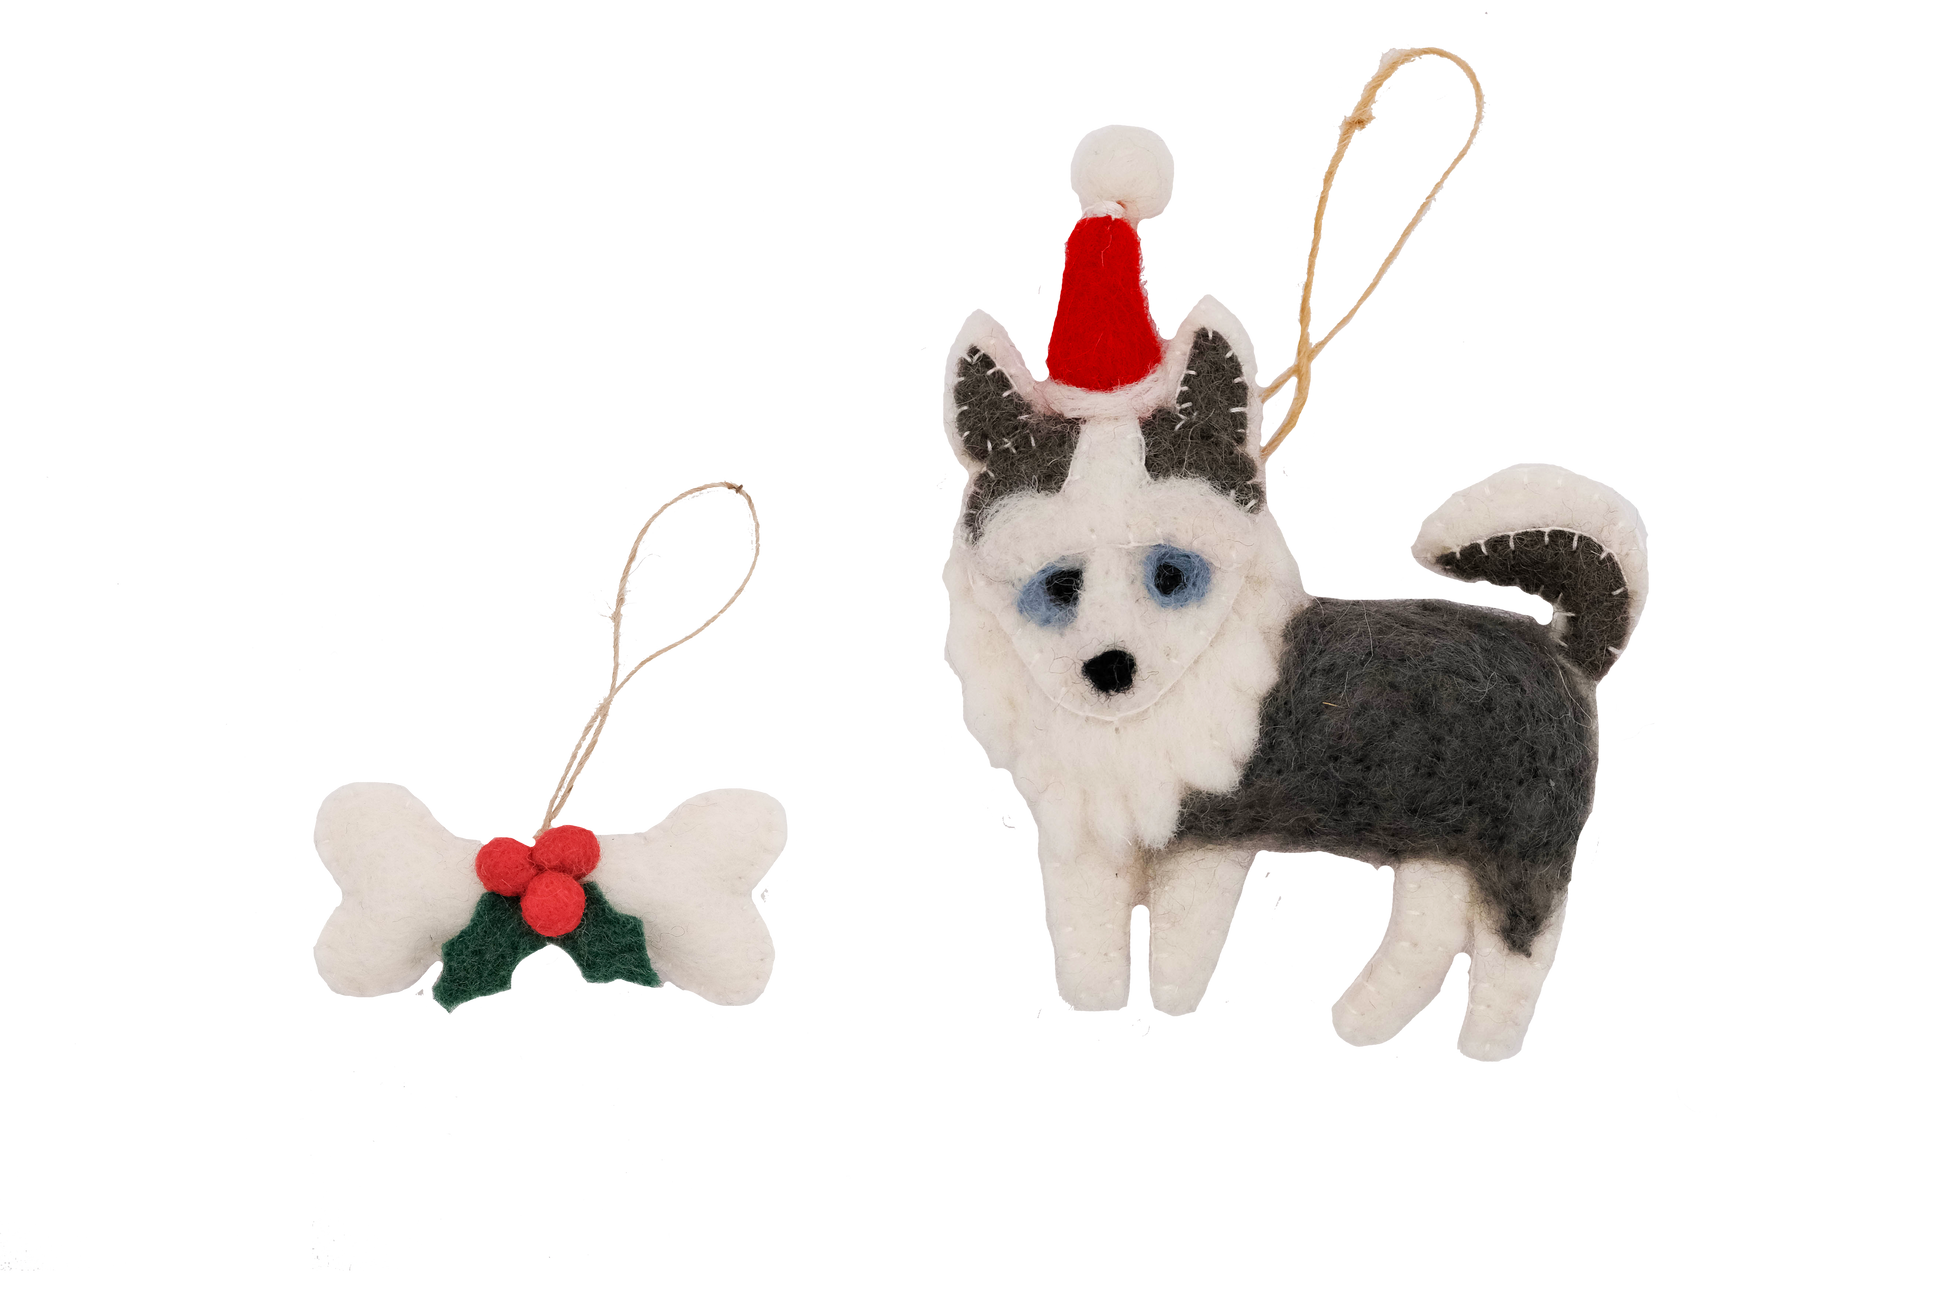 This Global Groove Life, handmade, ethical, fair trade, eco-friendly, sustainable, white and grey Husky Sant Dog with white, green and red bone treat ornament set was created by artisans in Kathmandu Nepal and will be a beautiful addition to your Christmas tree this holiday season.